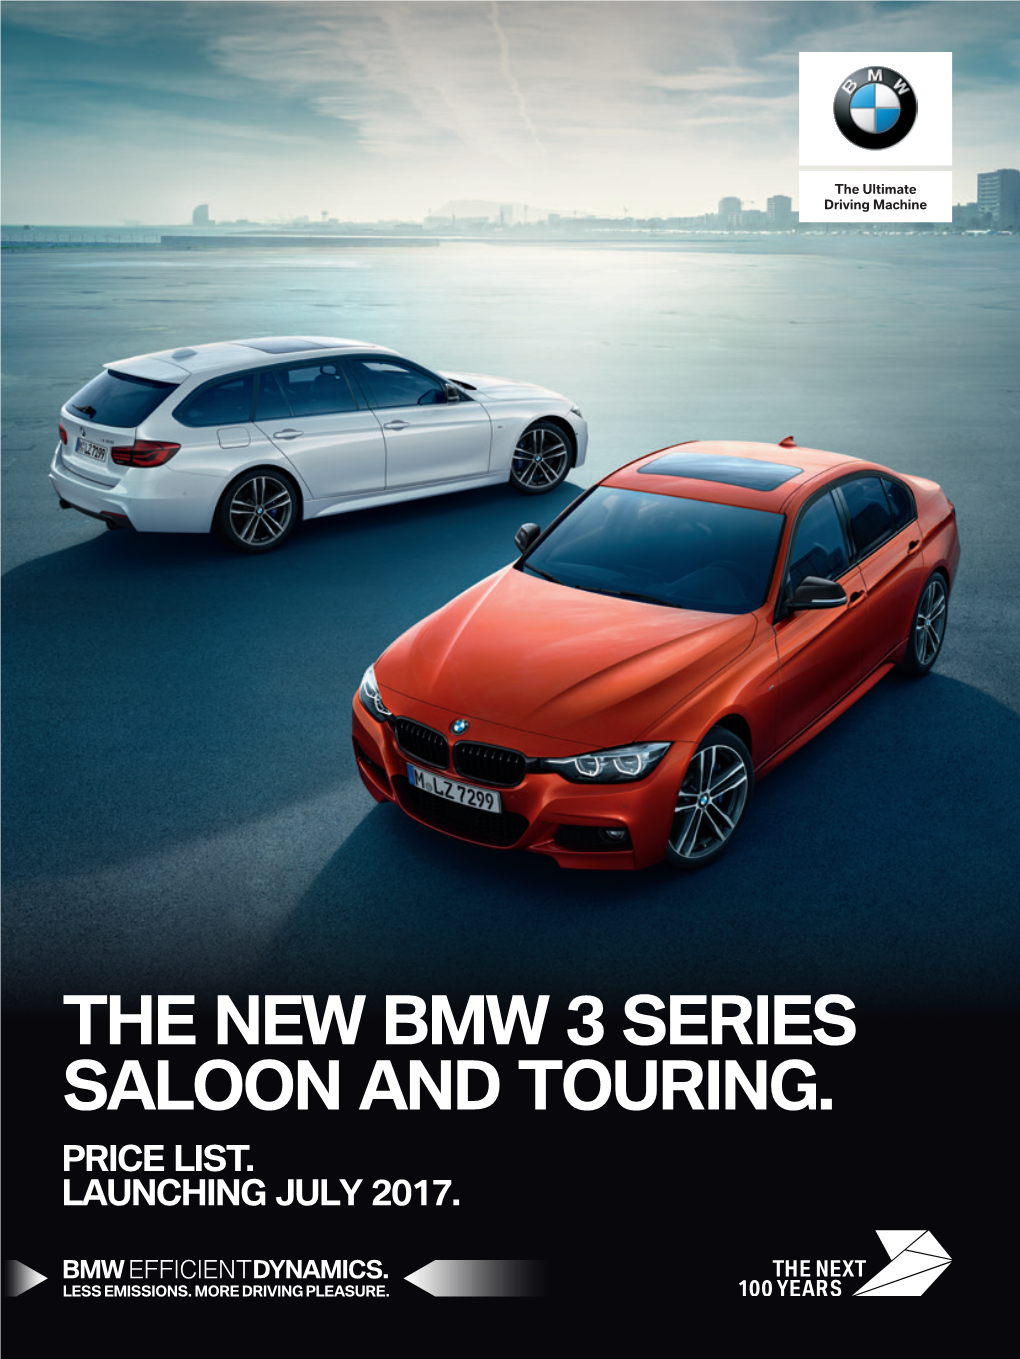 The New Bmw 3 Series Saloon and Touring. Price List